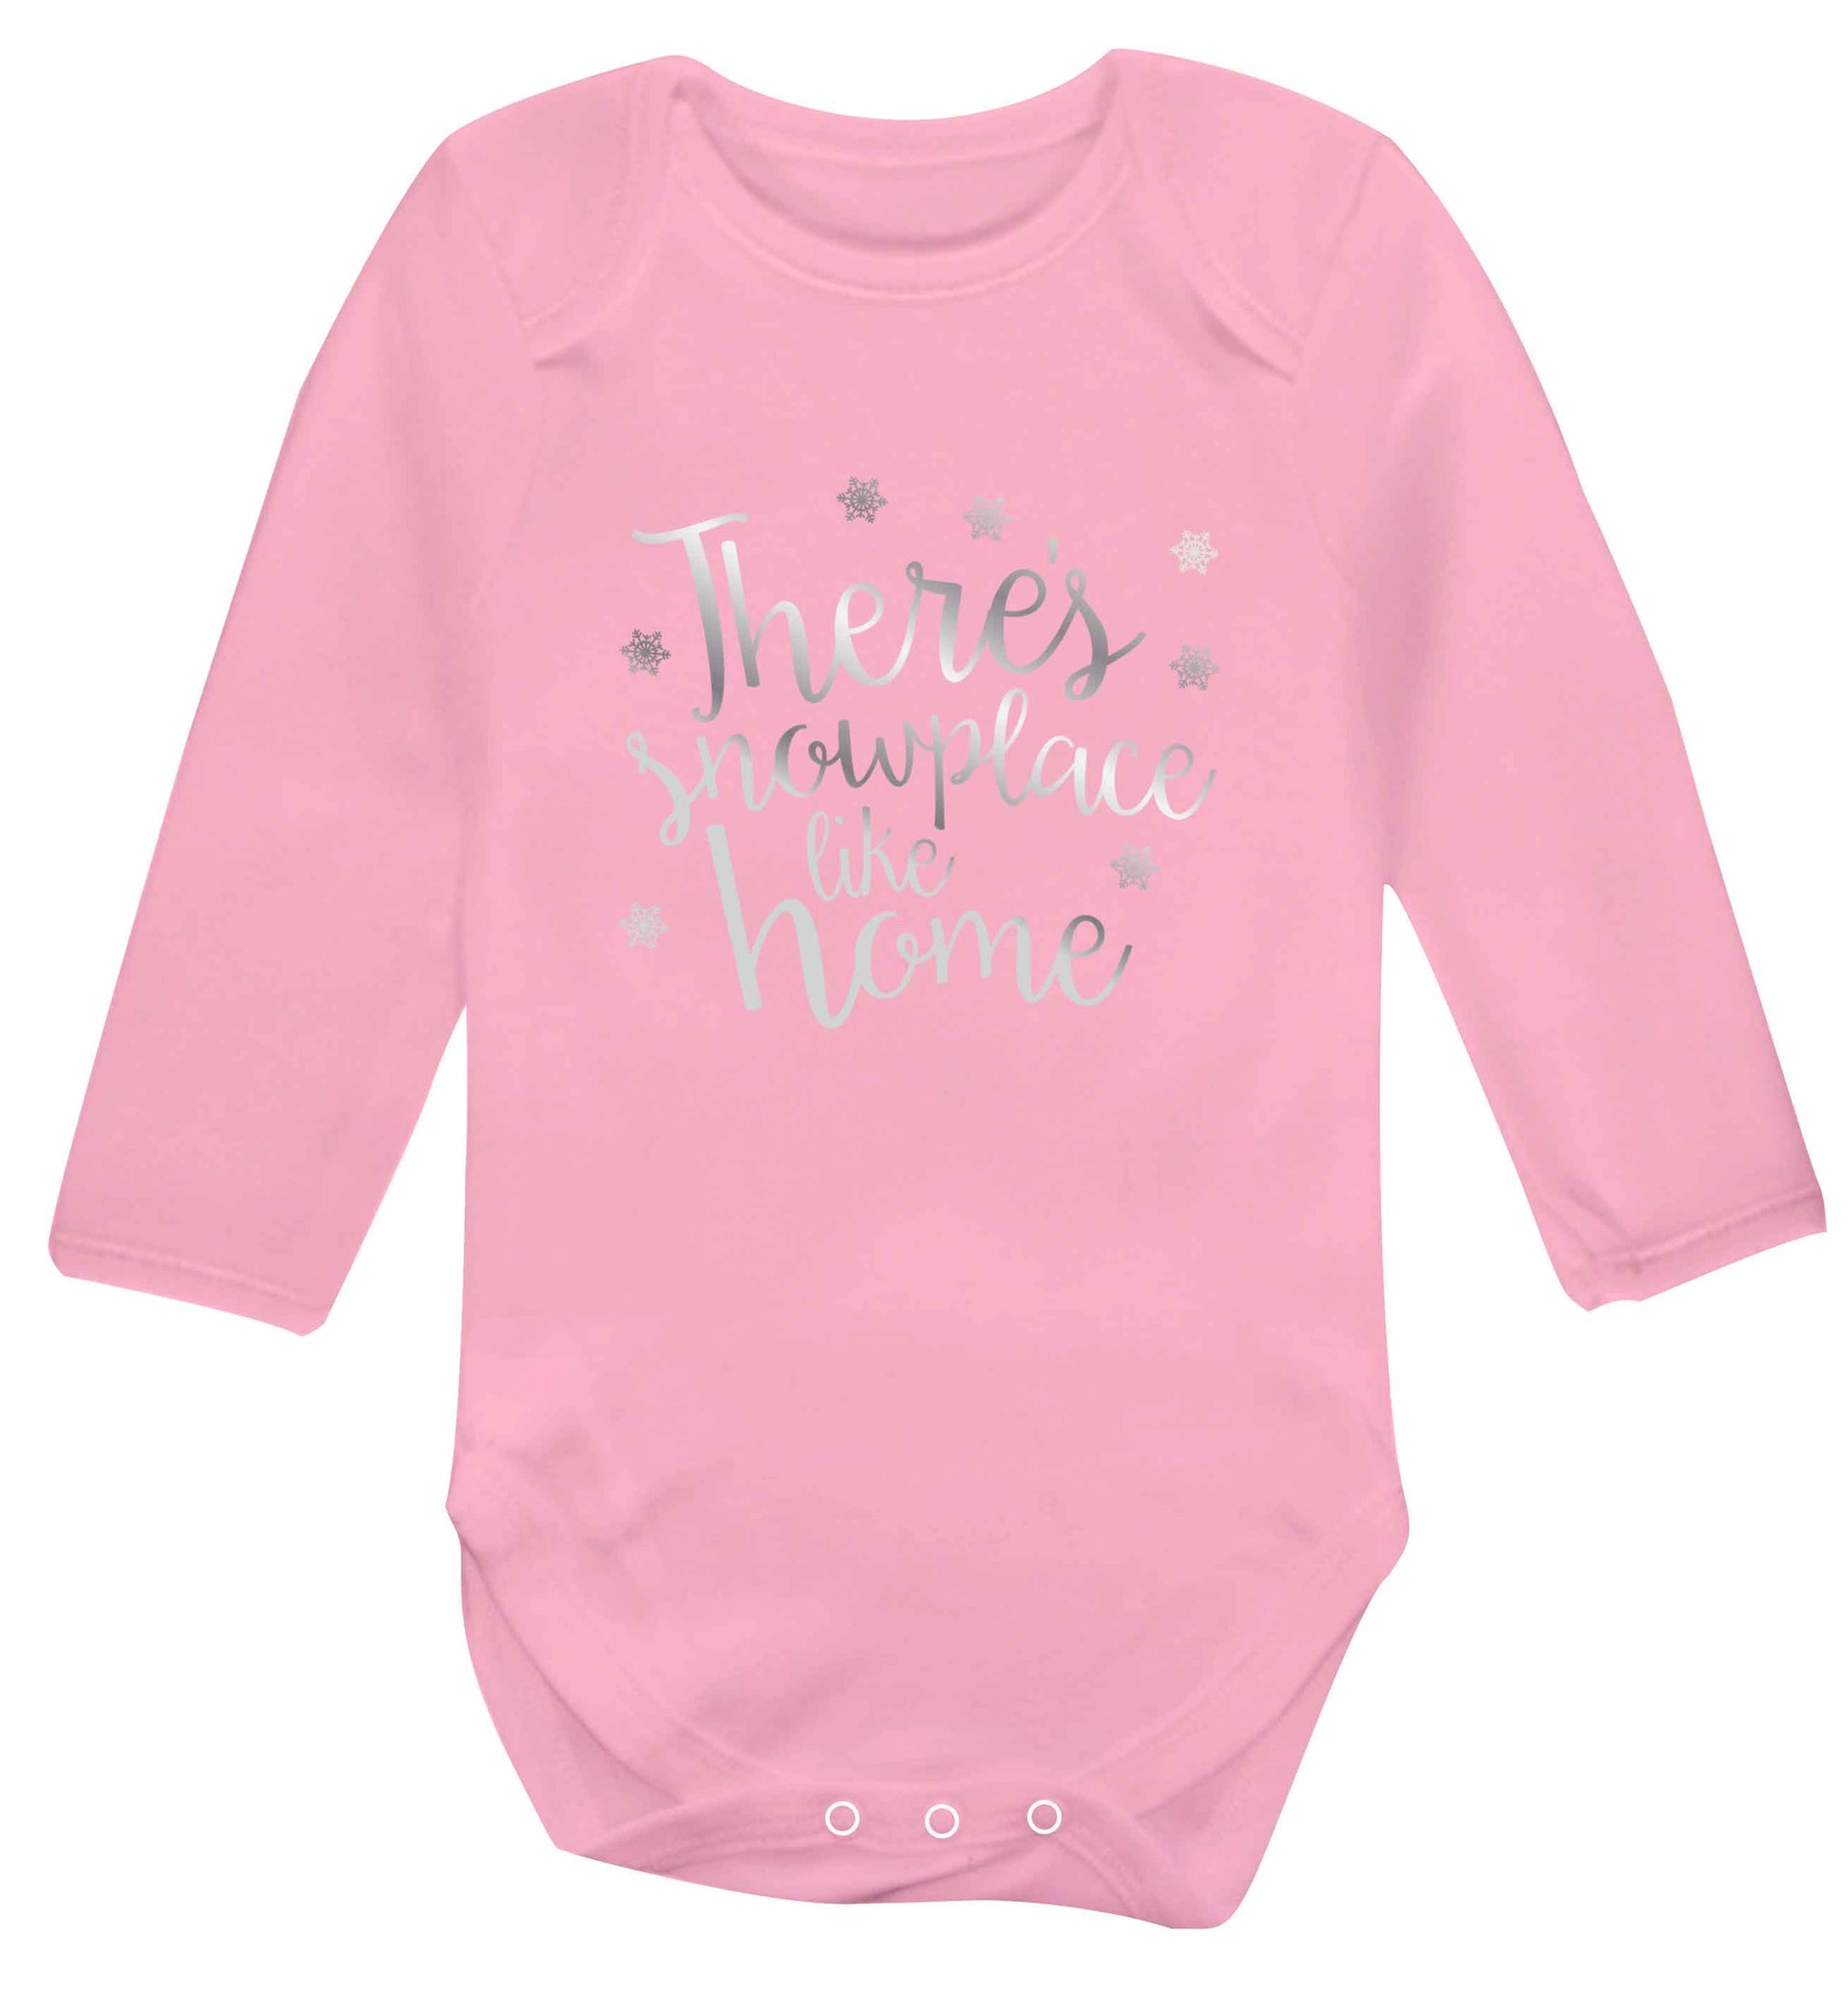 There's snowplace like home - metallic silver baby vest long sleeved pale pink 6-12 months